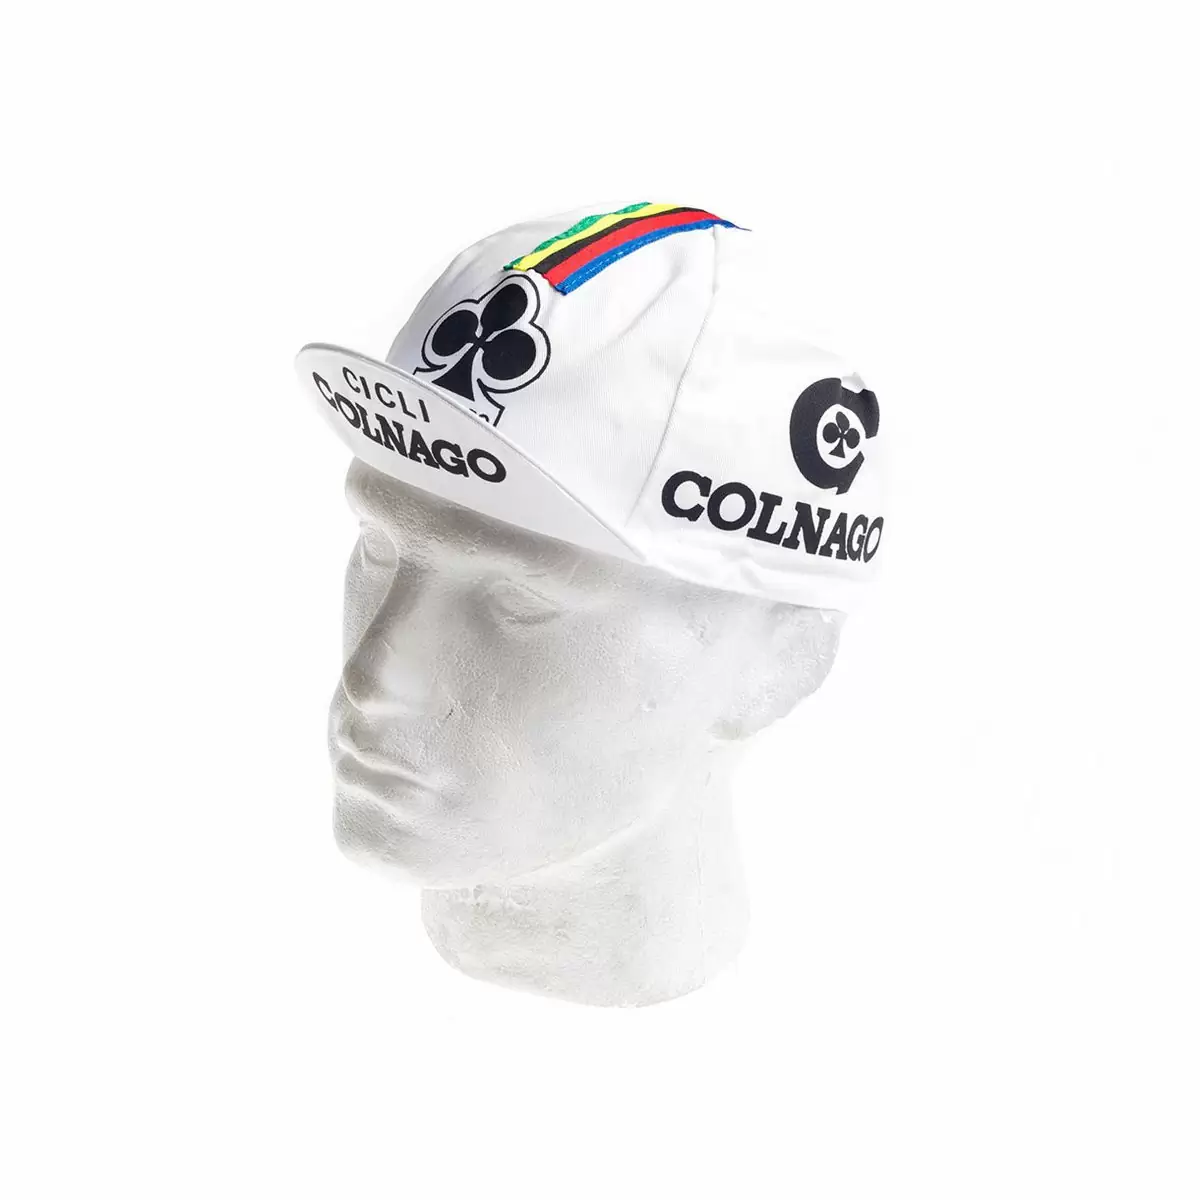 Vintage cycling cap with logo ''Colnago'' - image